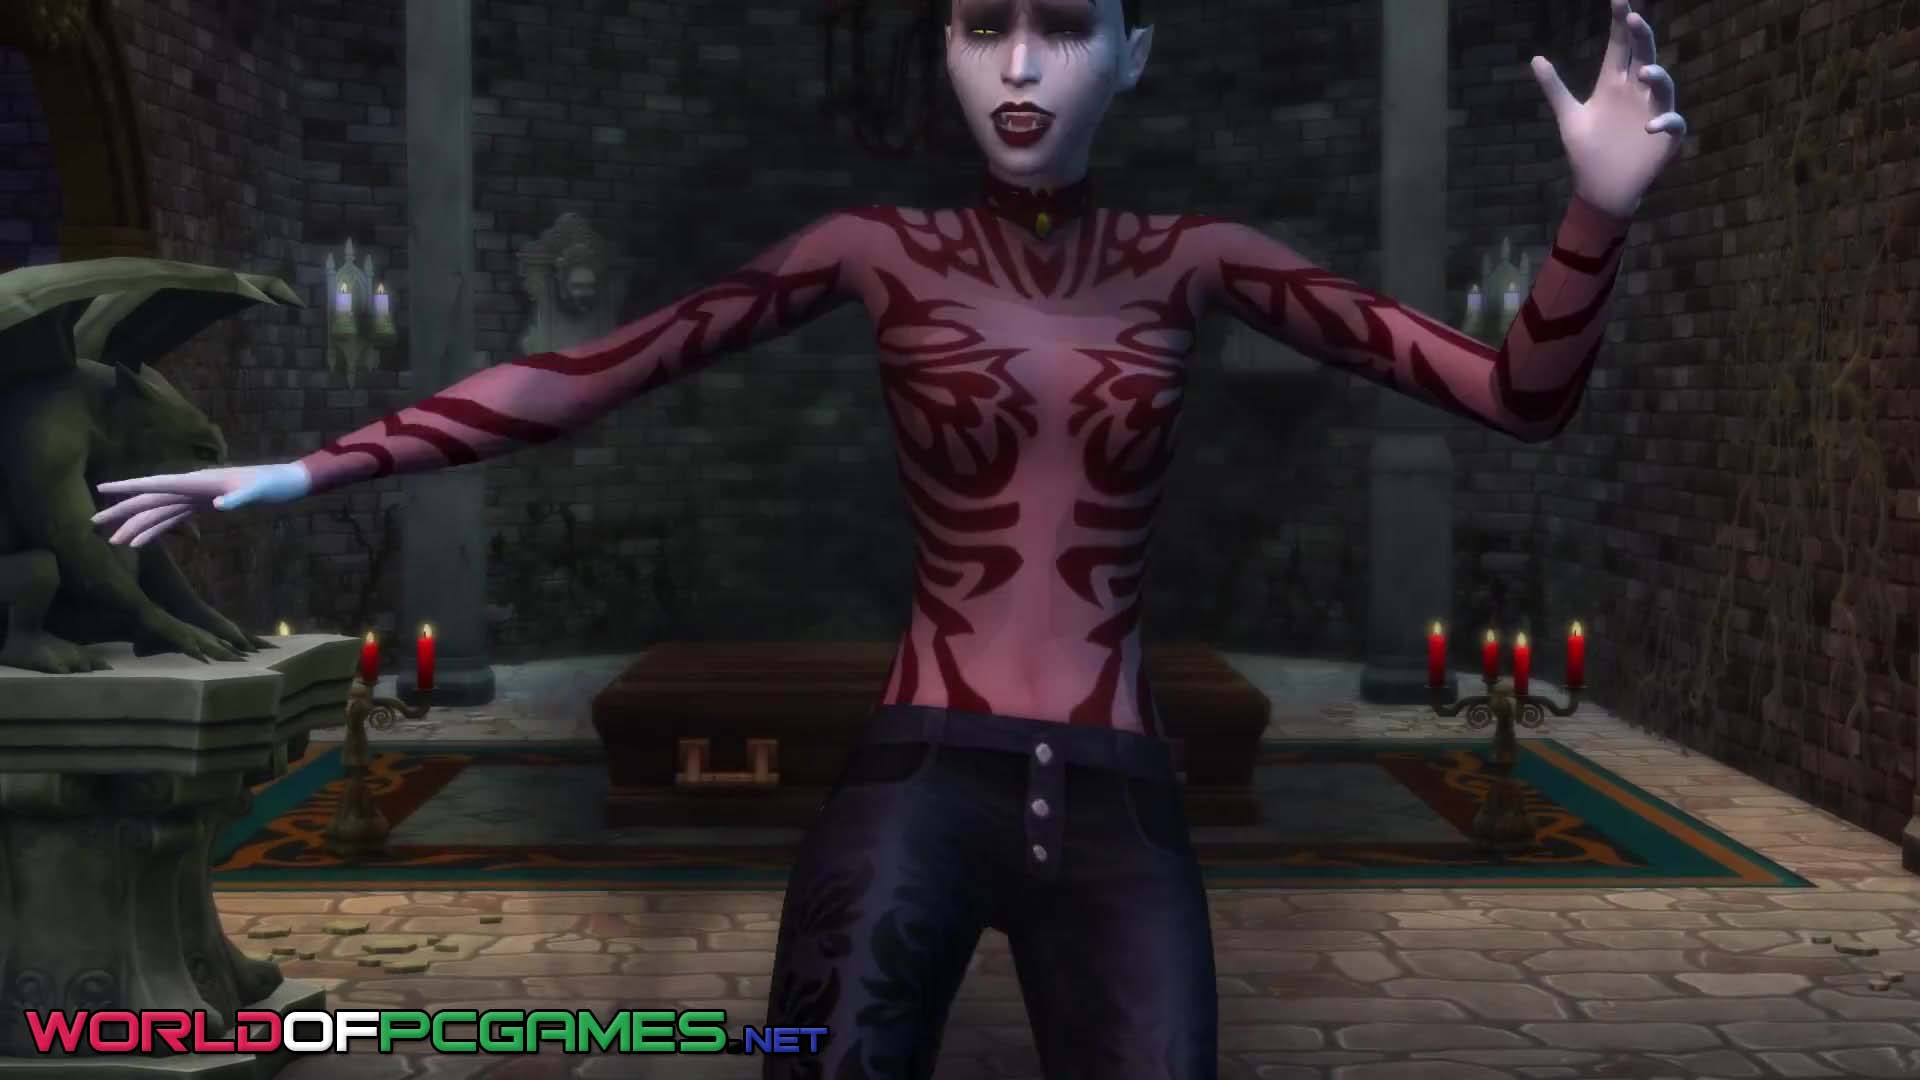 The SIMS 4 Vampires Free Download By worldof-pcgames.net